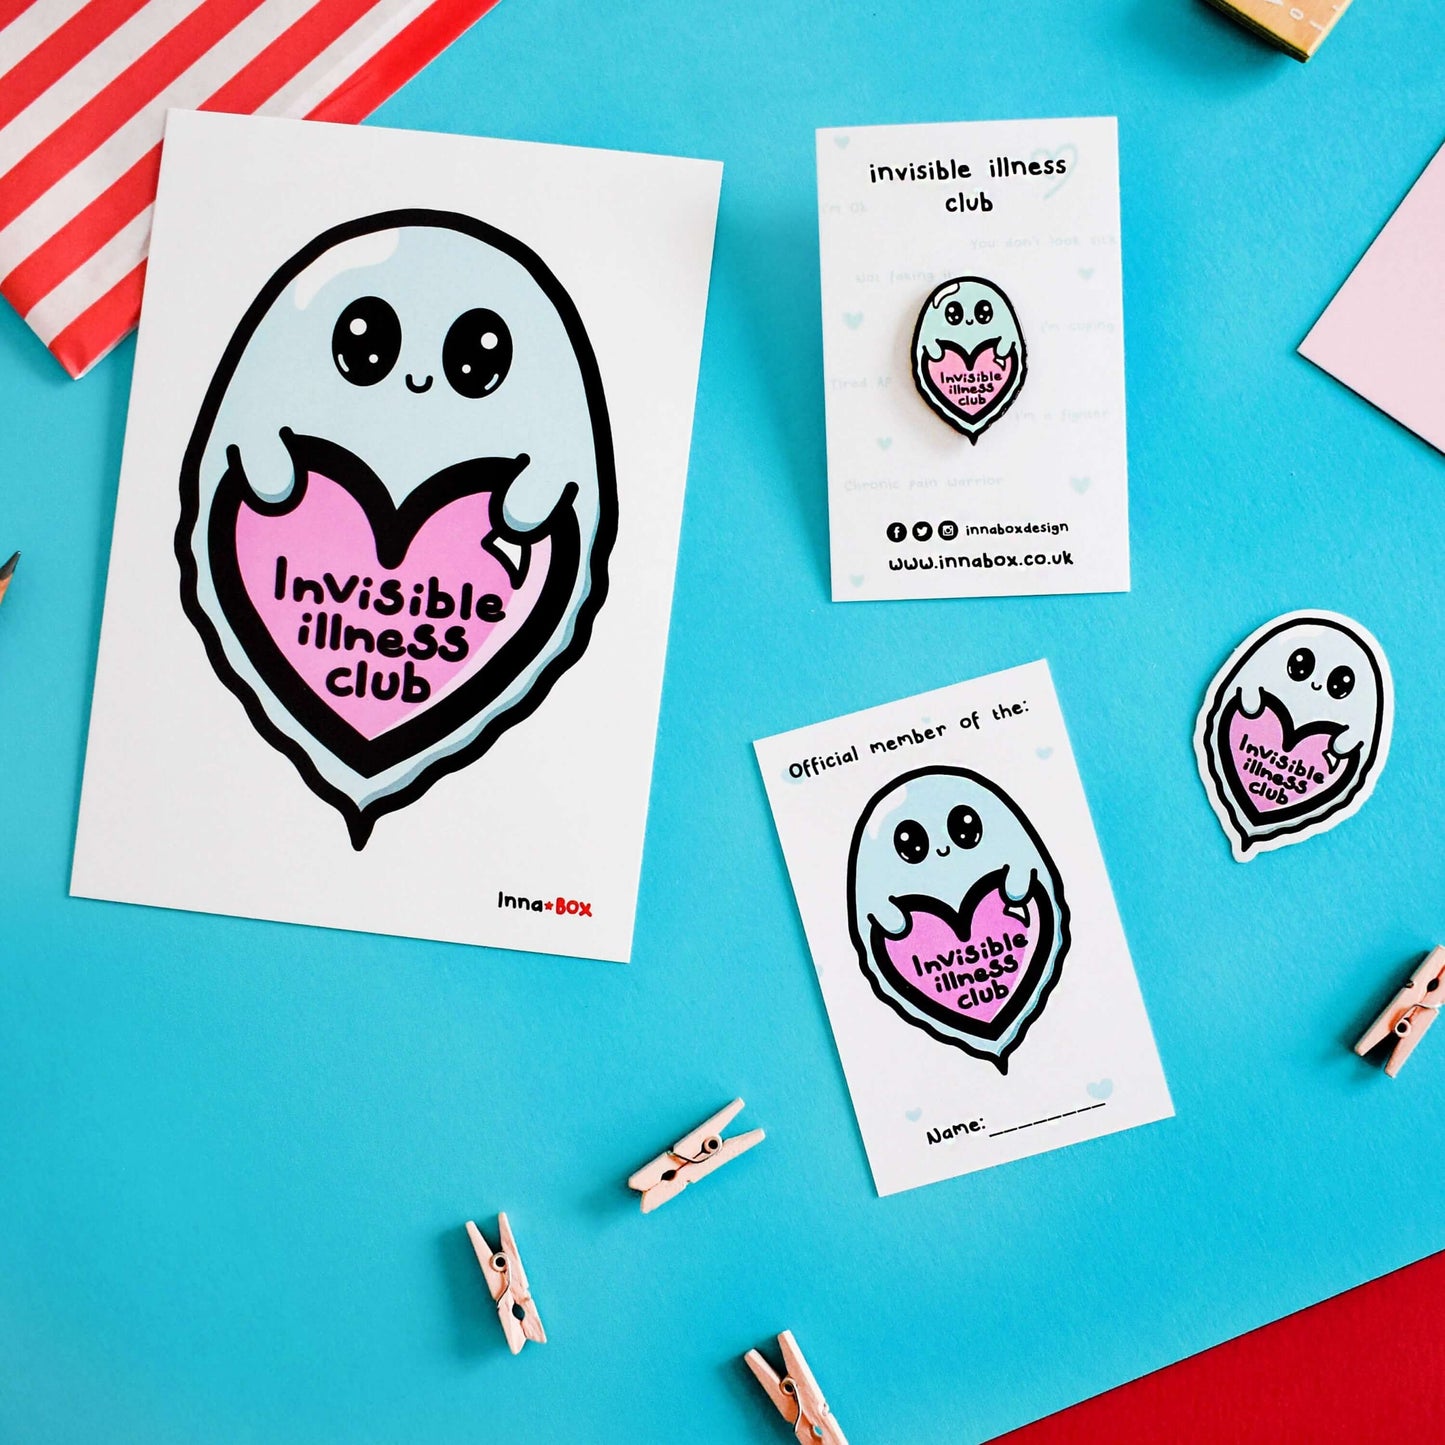 Part of the Invisible Illness Club Bundle, featuring Invisible illness club postcard, Invisible illness club sticker, Invisible illness club enamel pin and Invisible illness club membership card on a blue background. Each item features a cute mint green ghost with big eyes and little smile holding a pink heart with it's little hands that has 'invisible illness club' written in black writing in the middle of the heart.